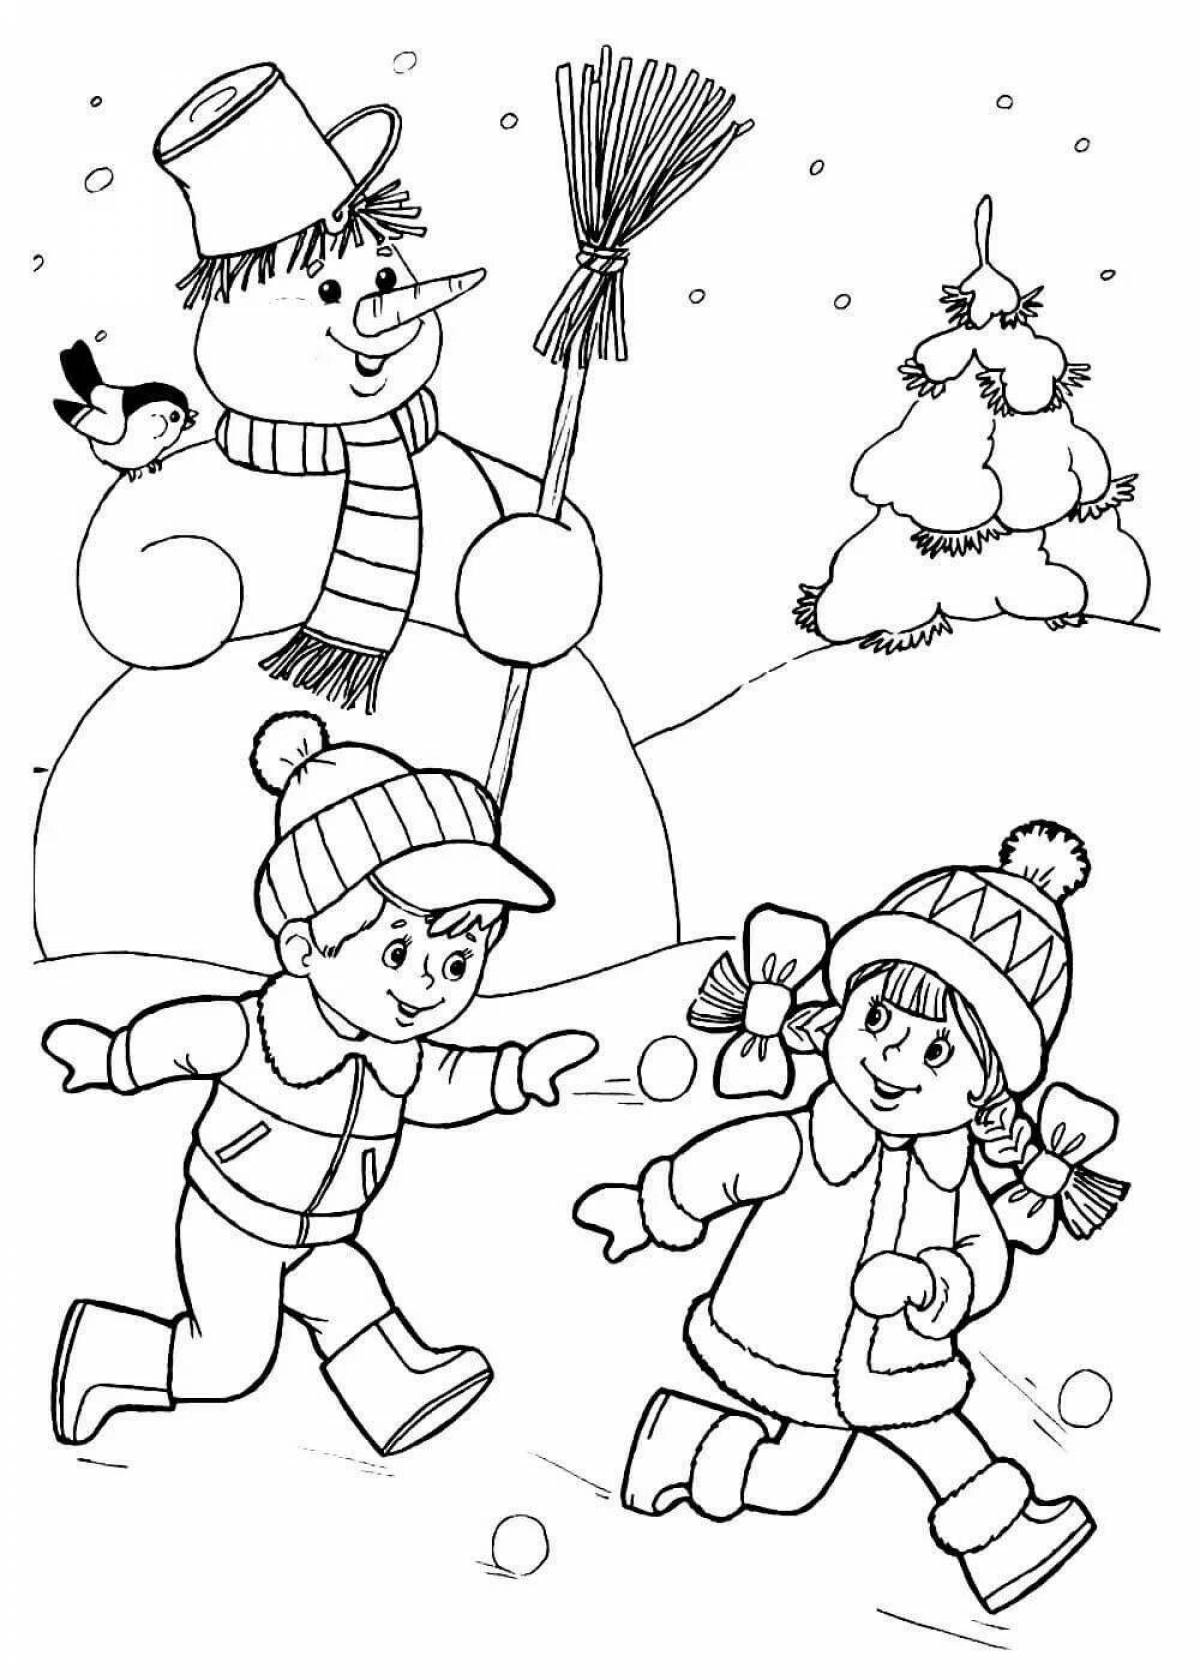 Colorful Christmas coloring games